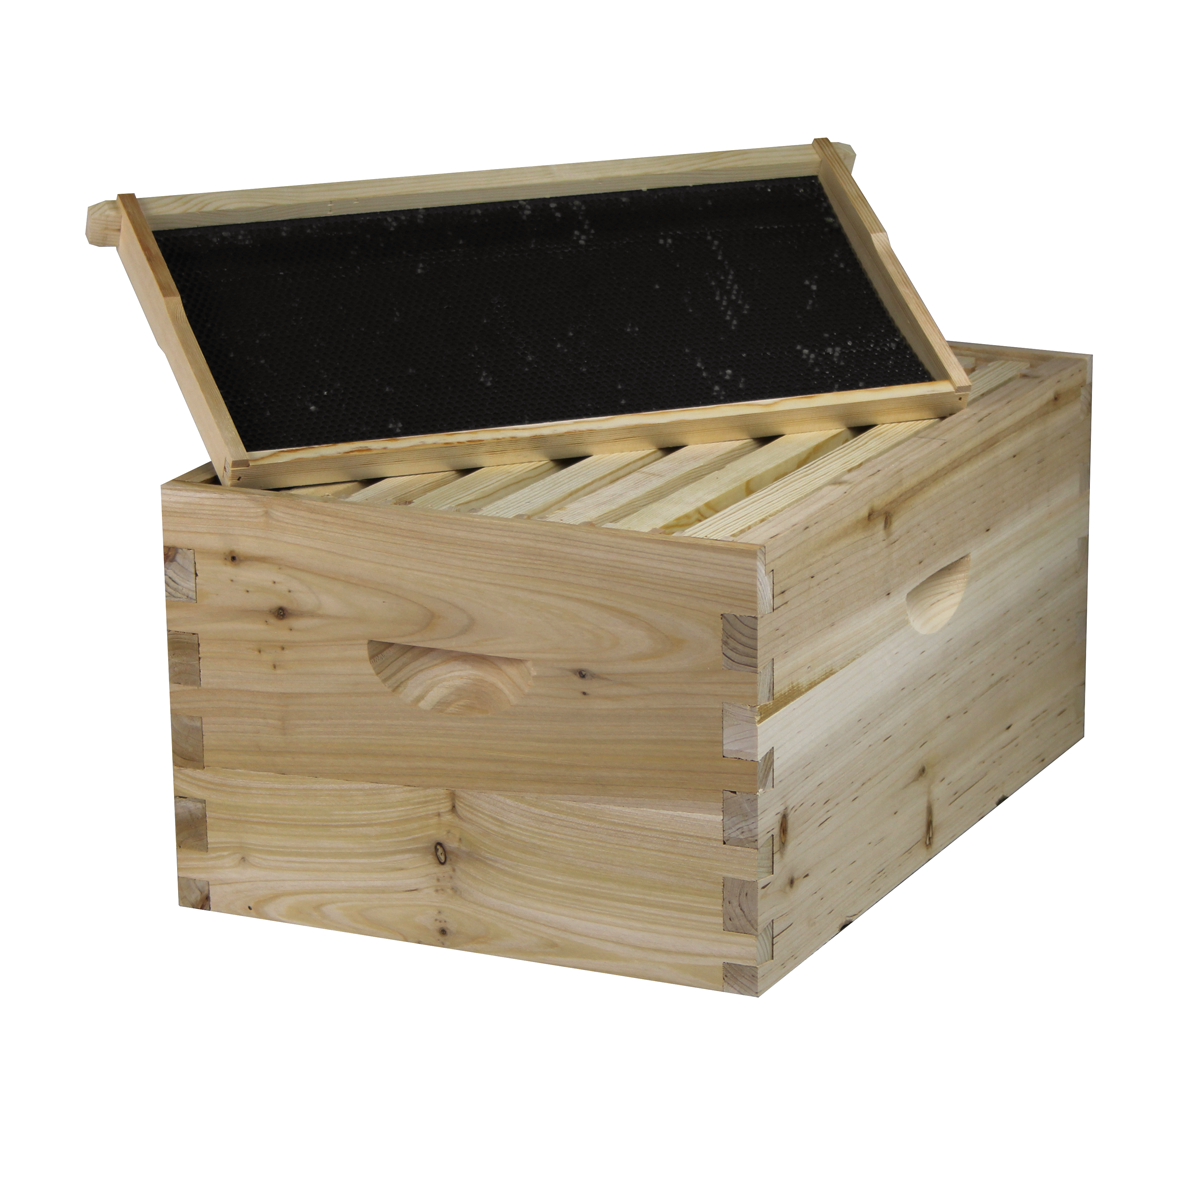 NuBee 8 Frame Deep Brood Box With Frames & Foundations